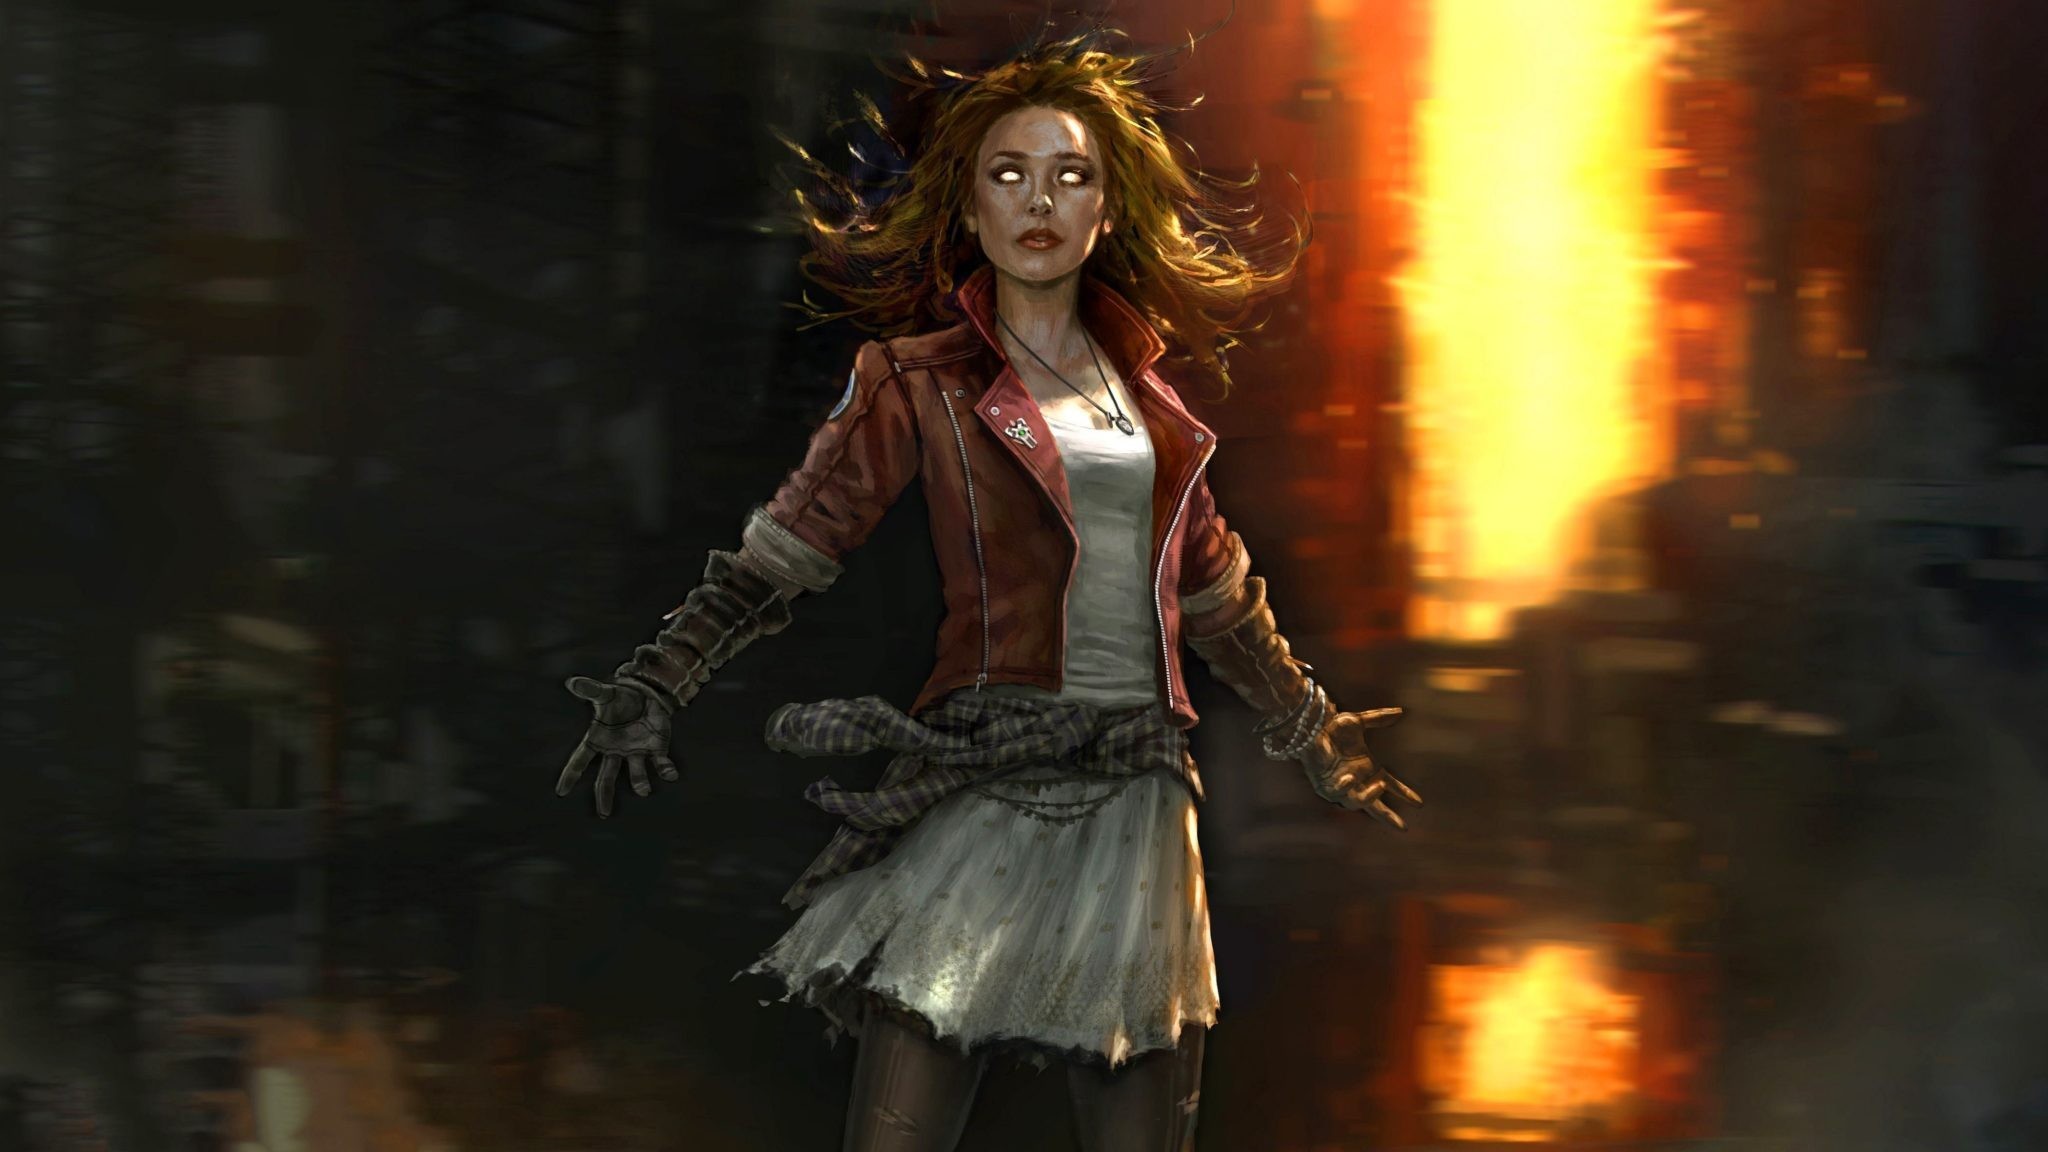 2048x1152 Scarlet Witch Wanda Maximoff 4K Wallpapers, Images